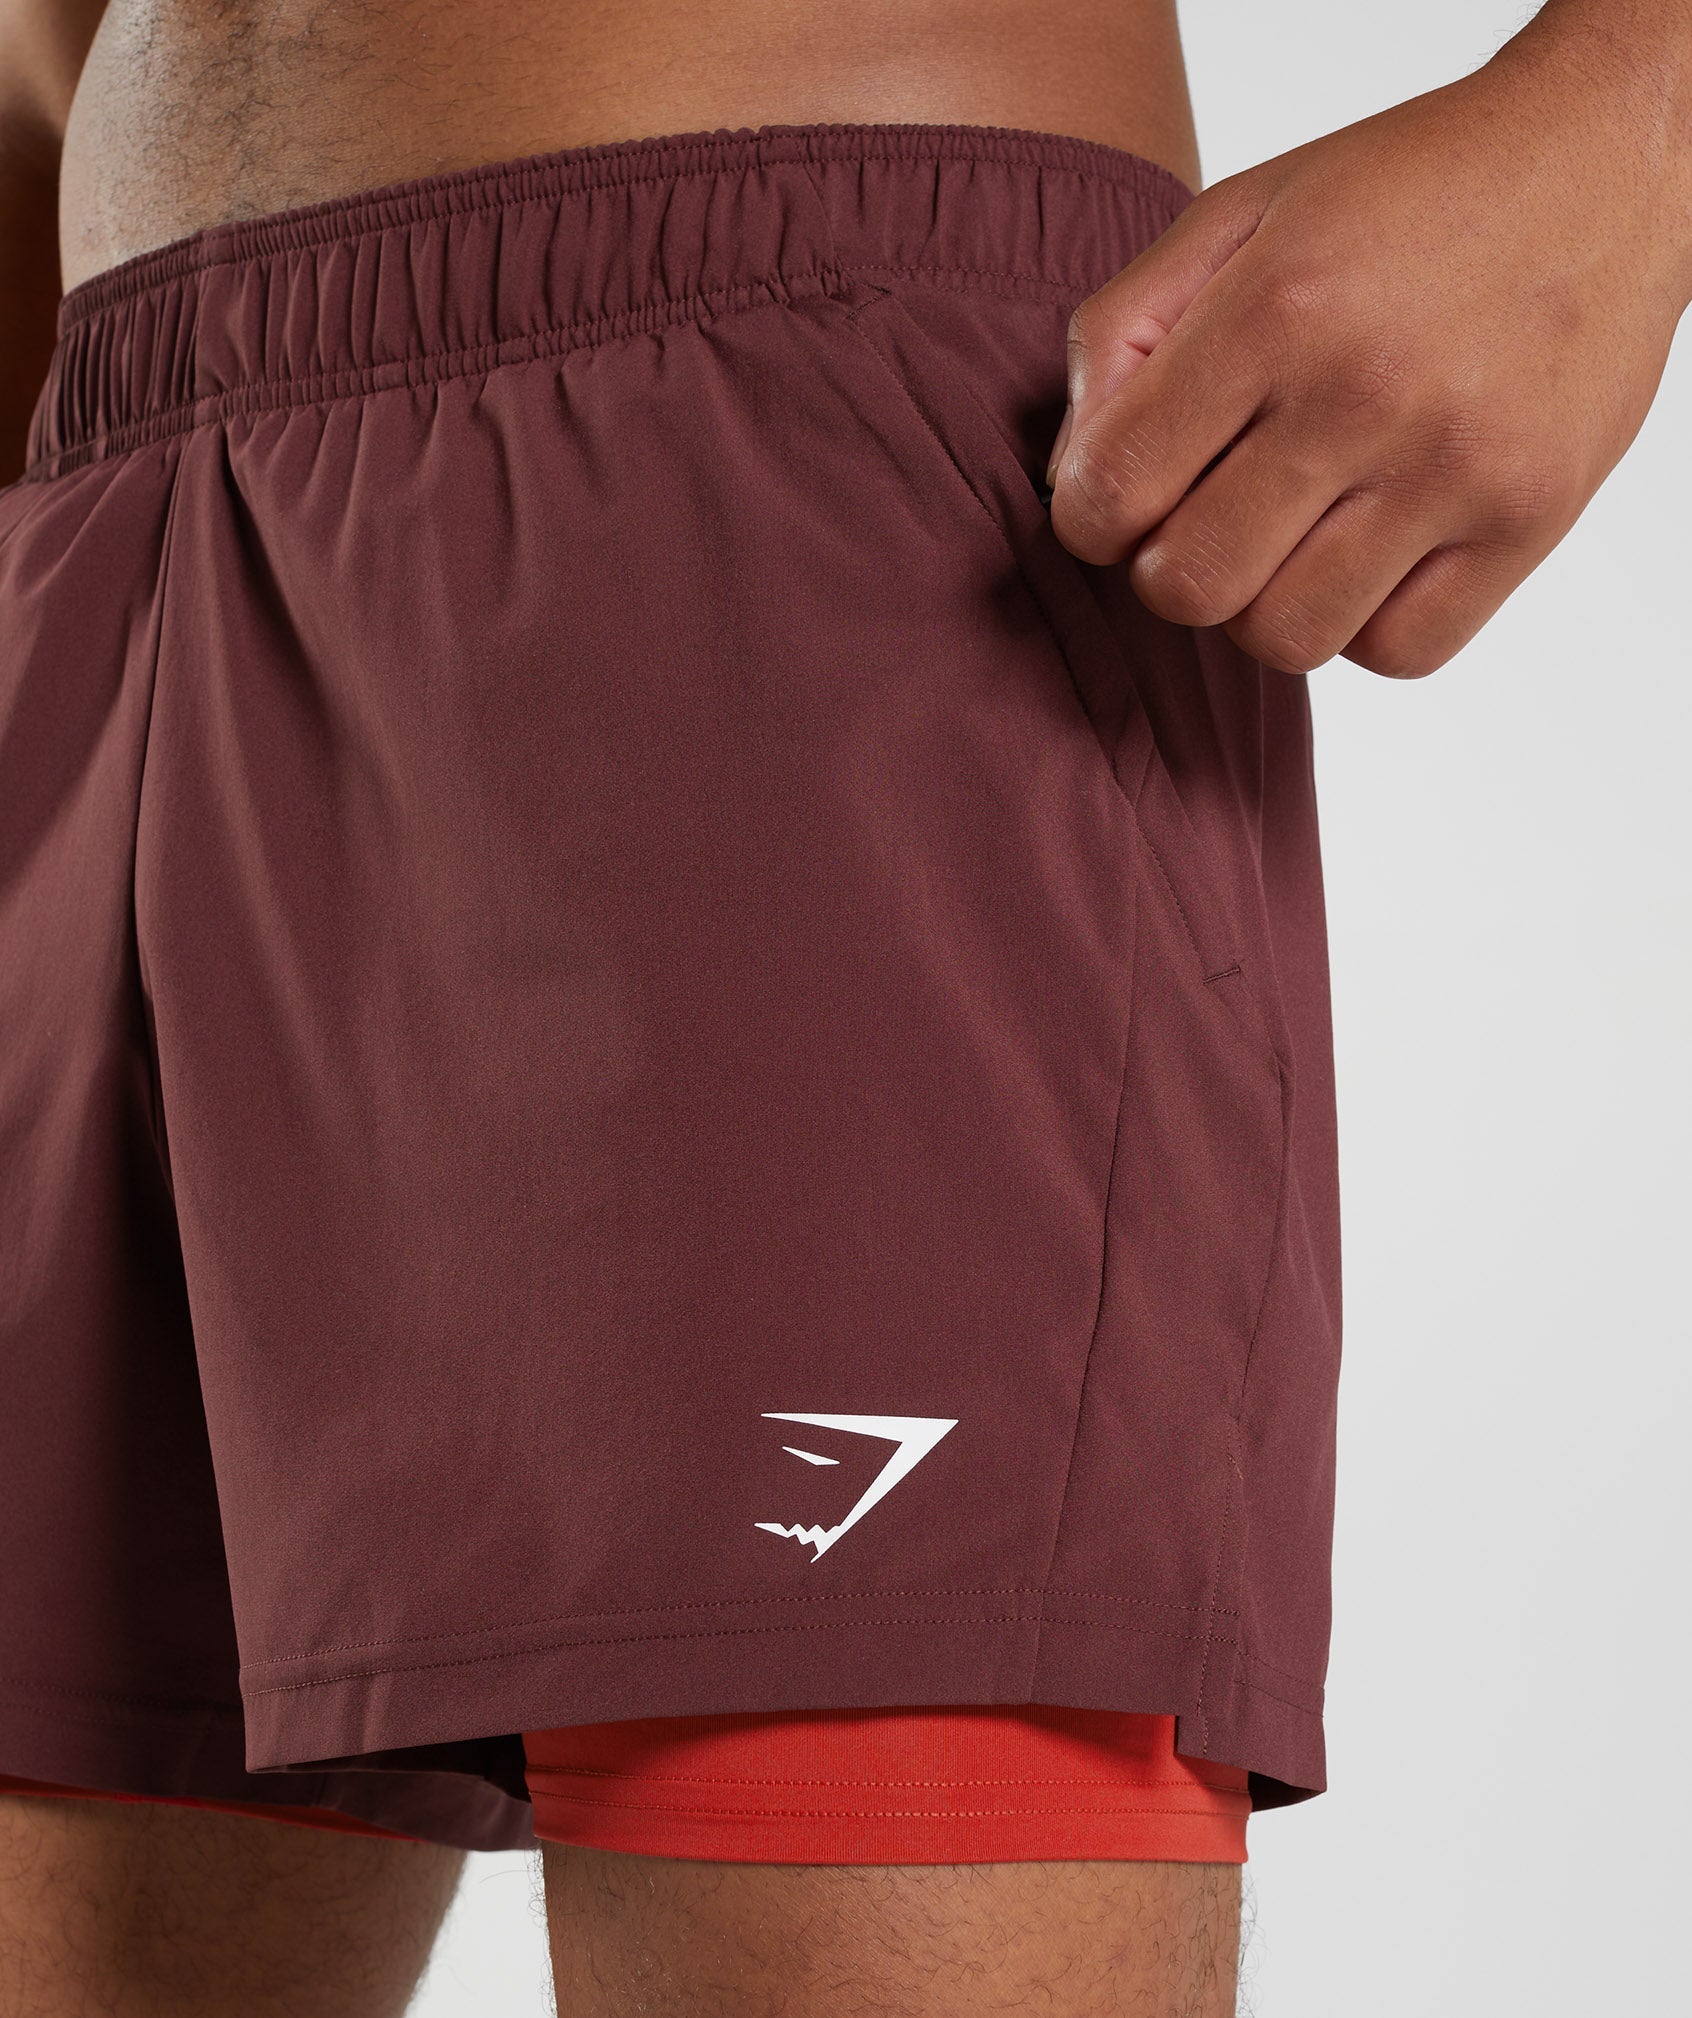 Sport 5" 2 In 1 Shorts in Baked Maroon/Salsa Red - view 6